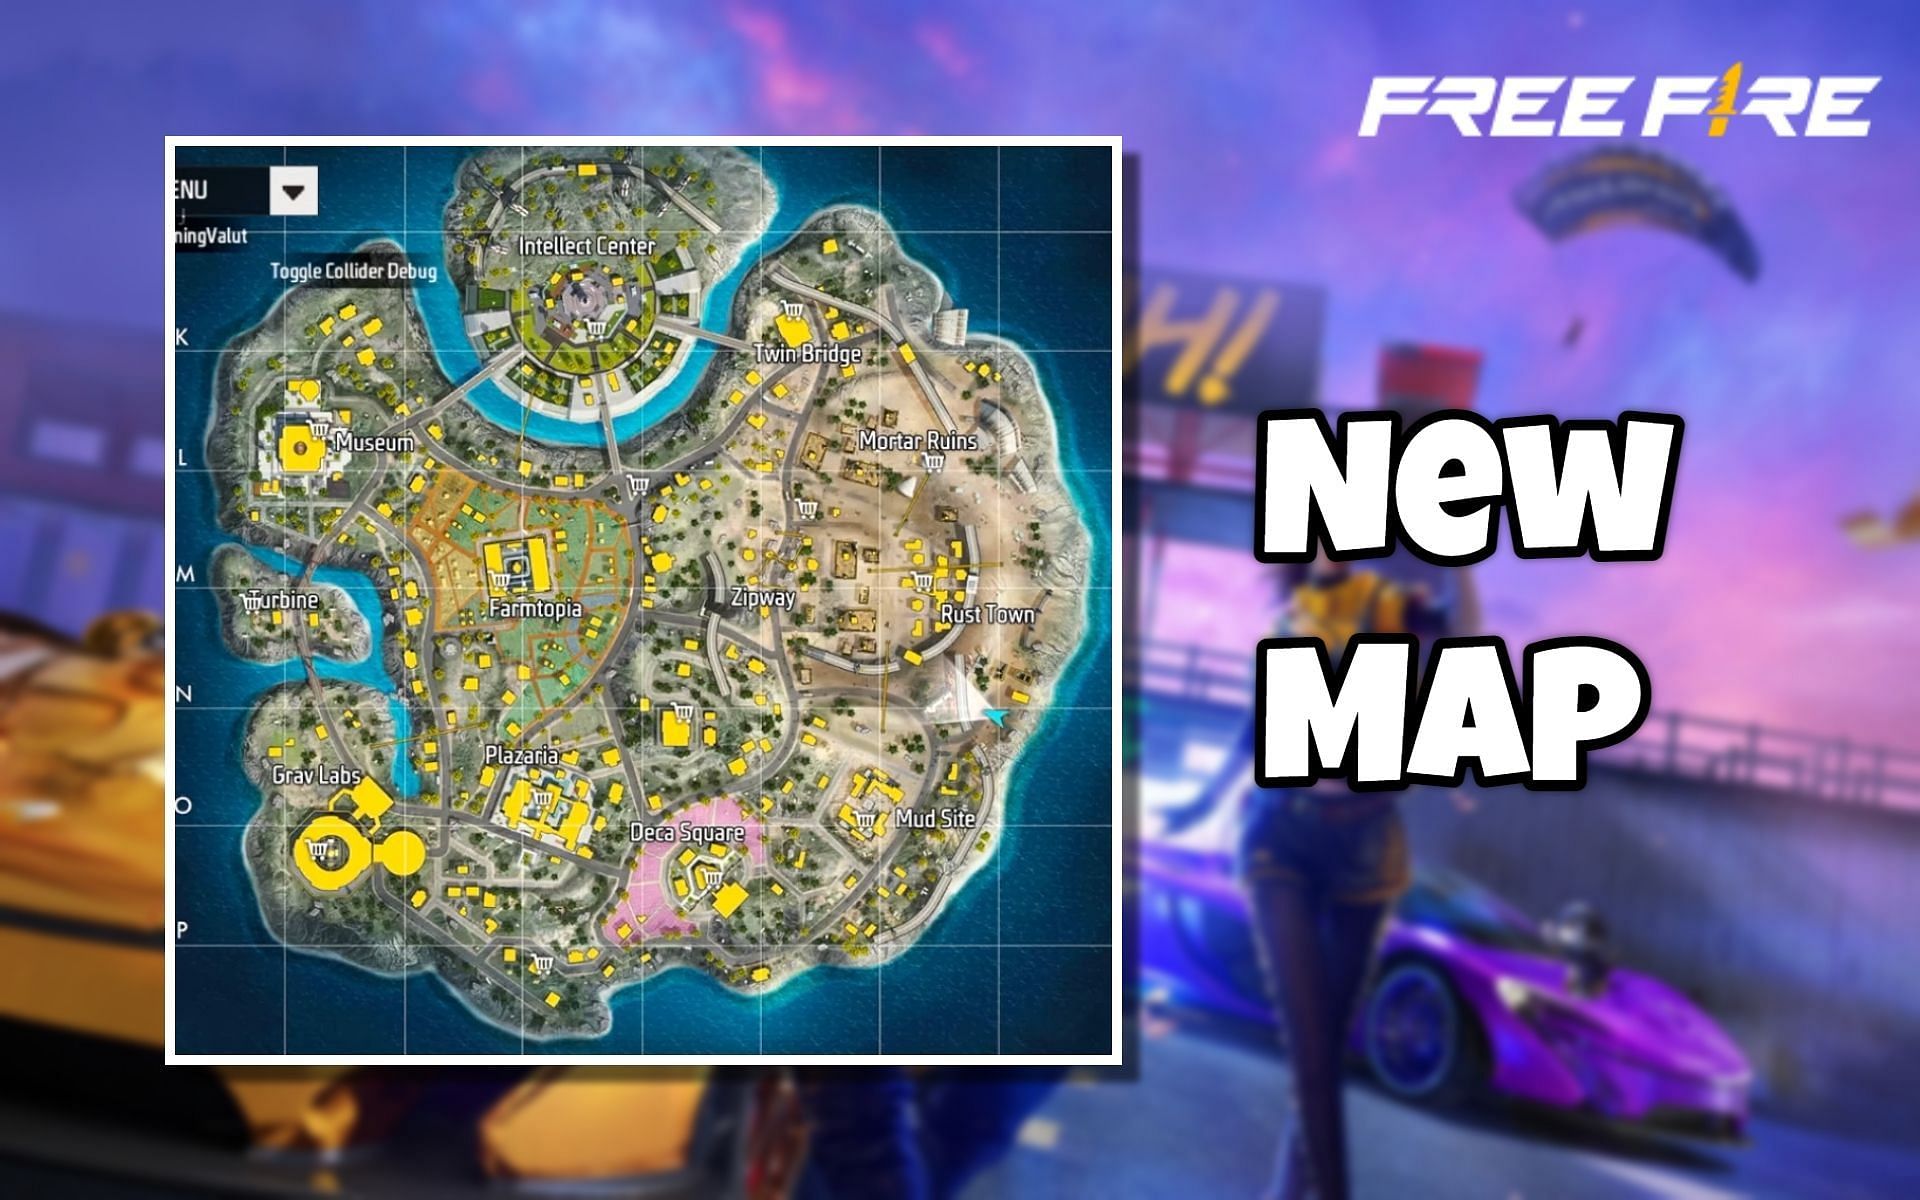 Nexterra is the new map that is all set to be added into the game (Image via Sportskeeda)